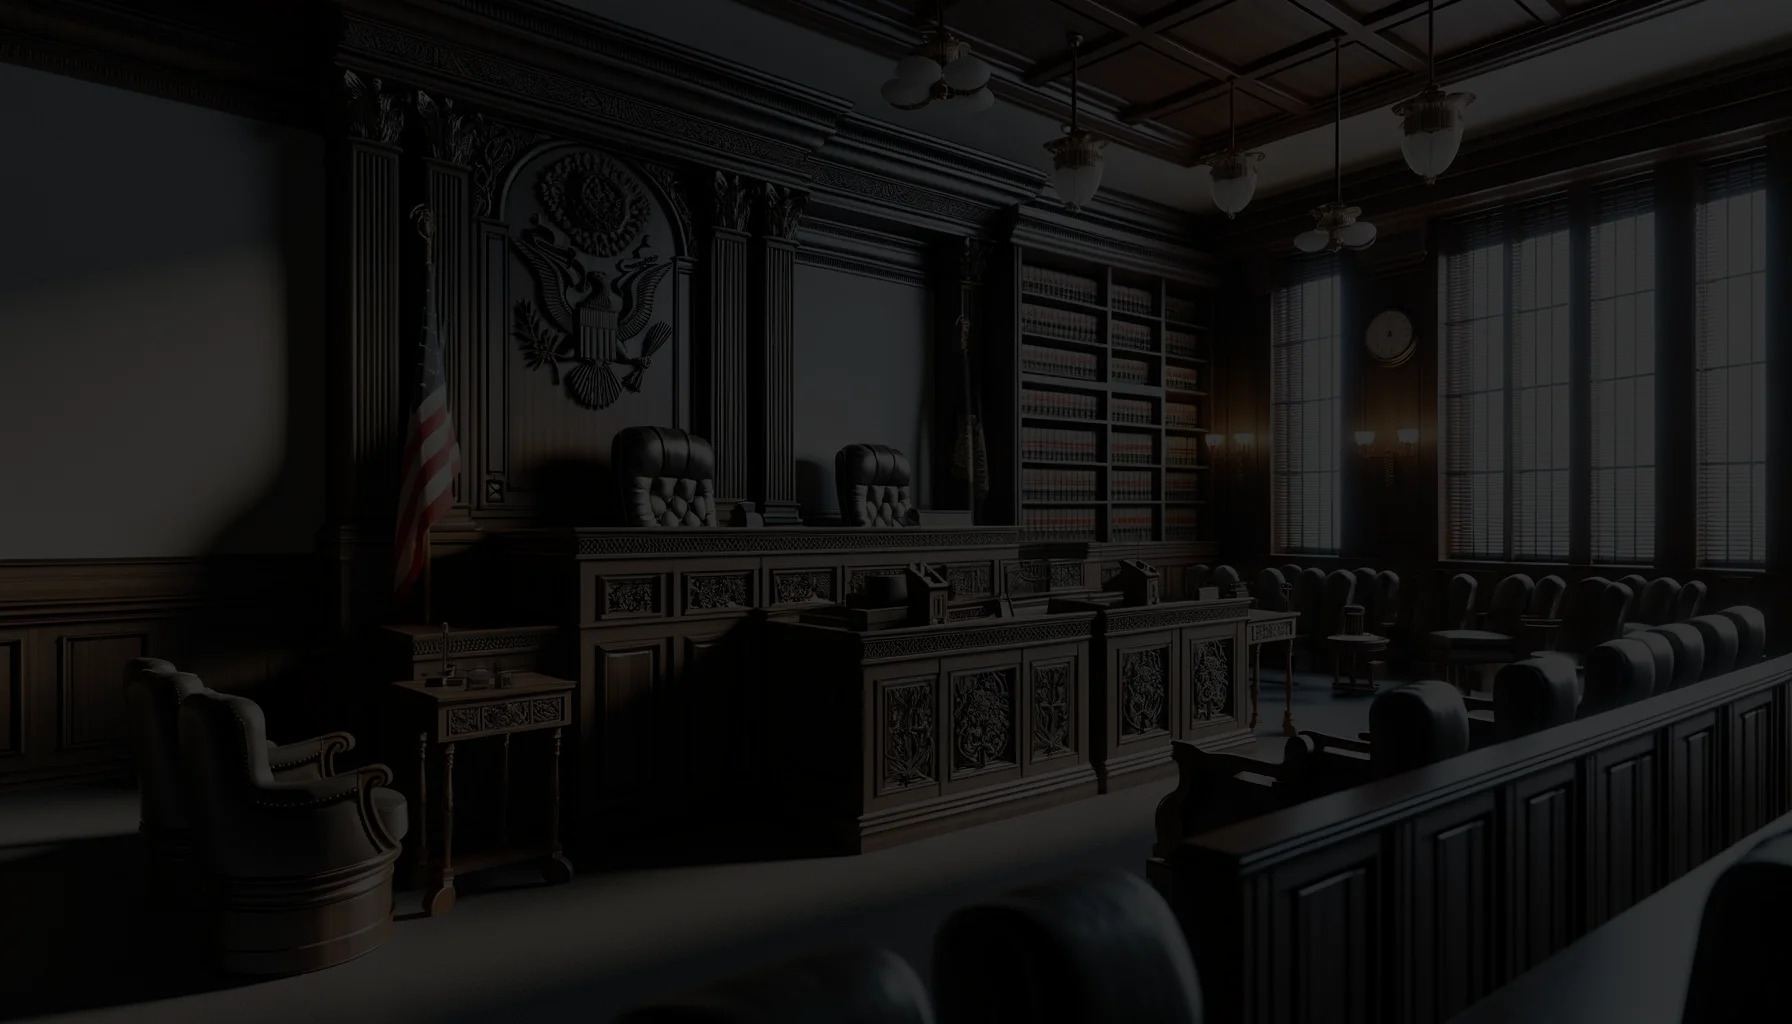 courtroom aei law